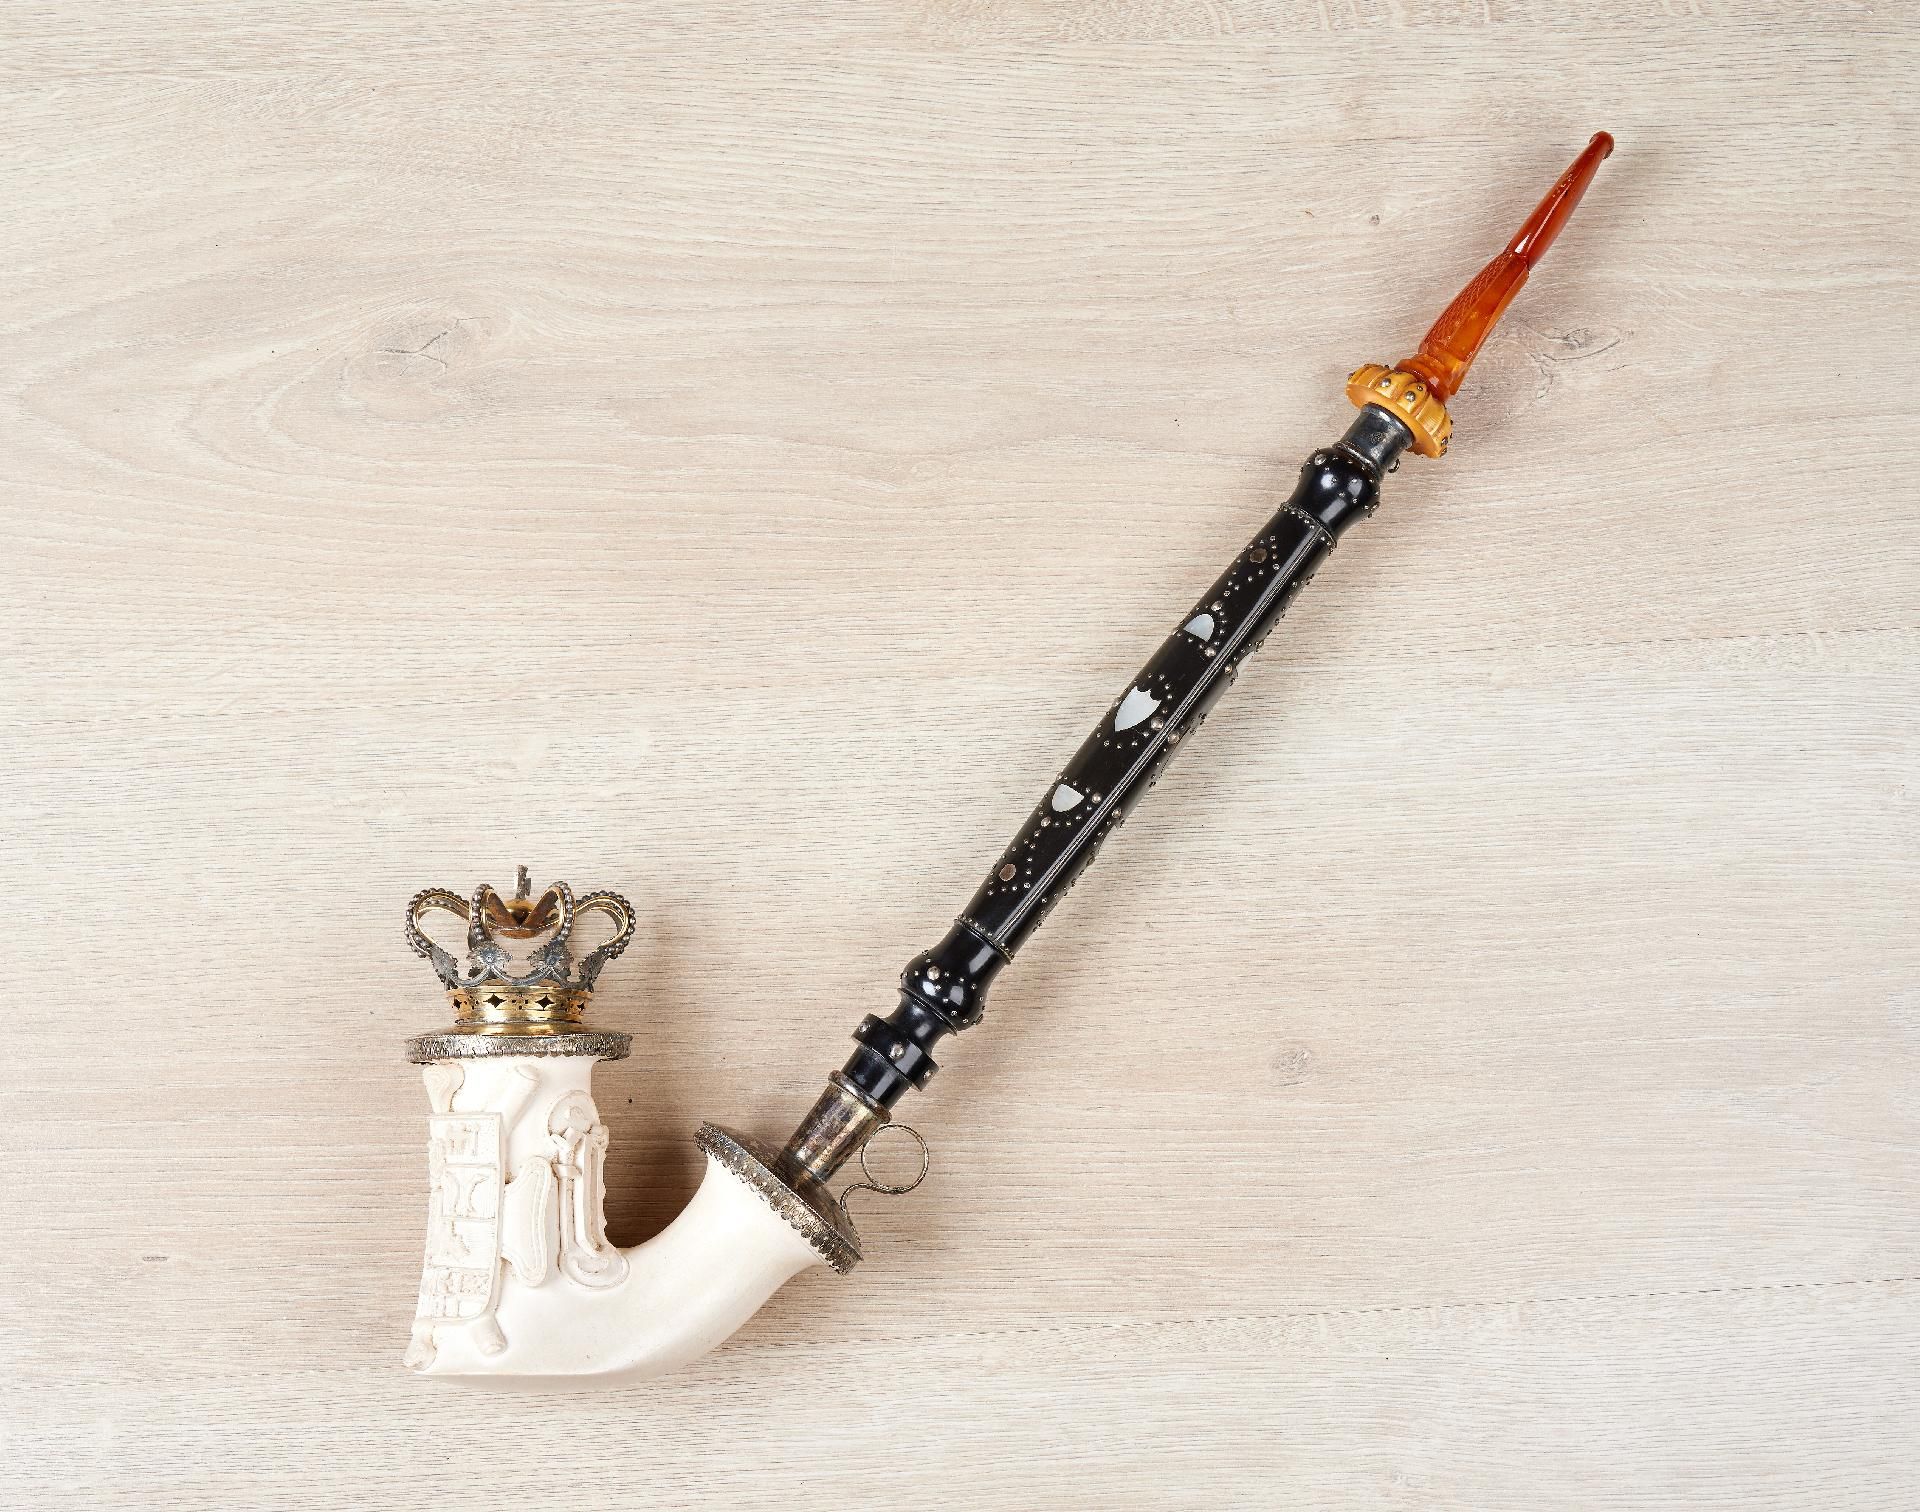 Württemberg : An important meerschaum pipe from the Württemberg royal family. - Image 3 of 9